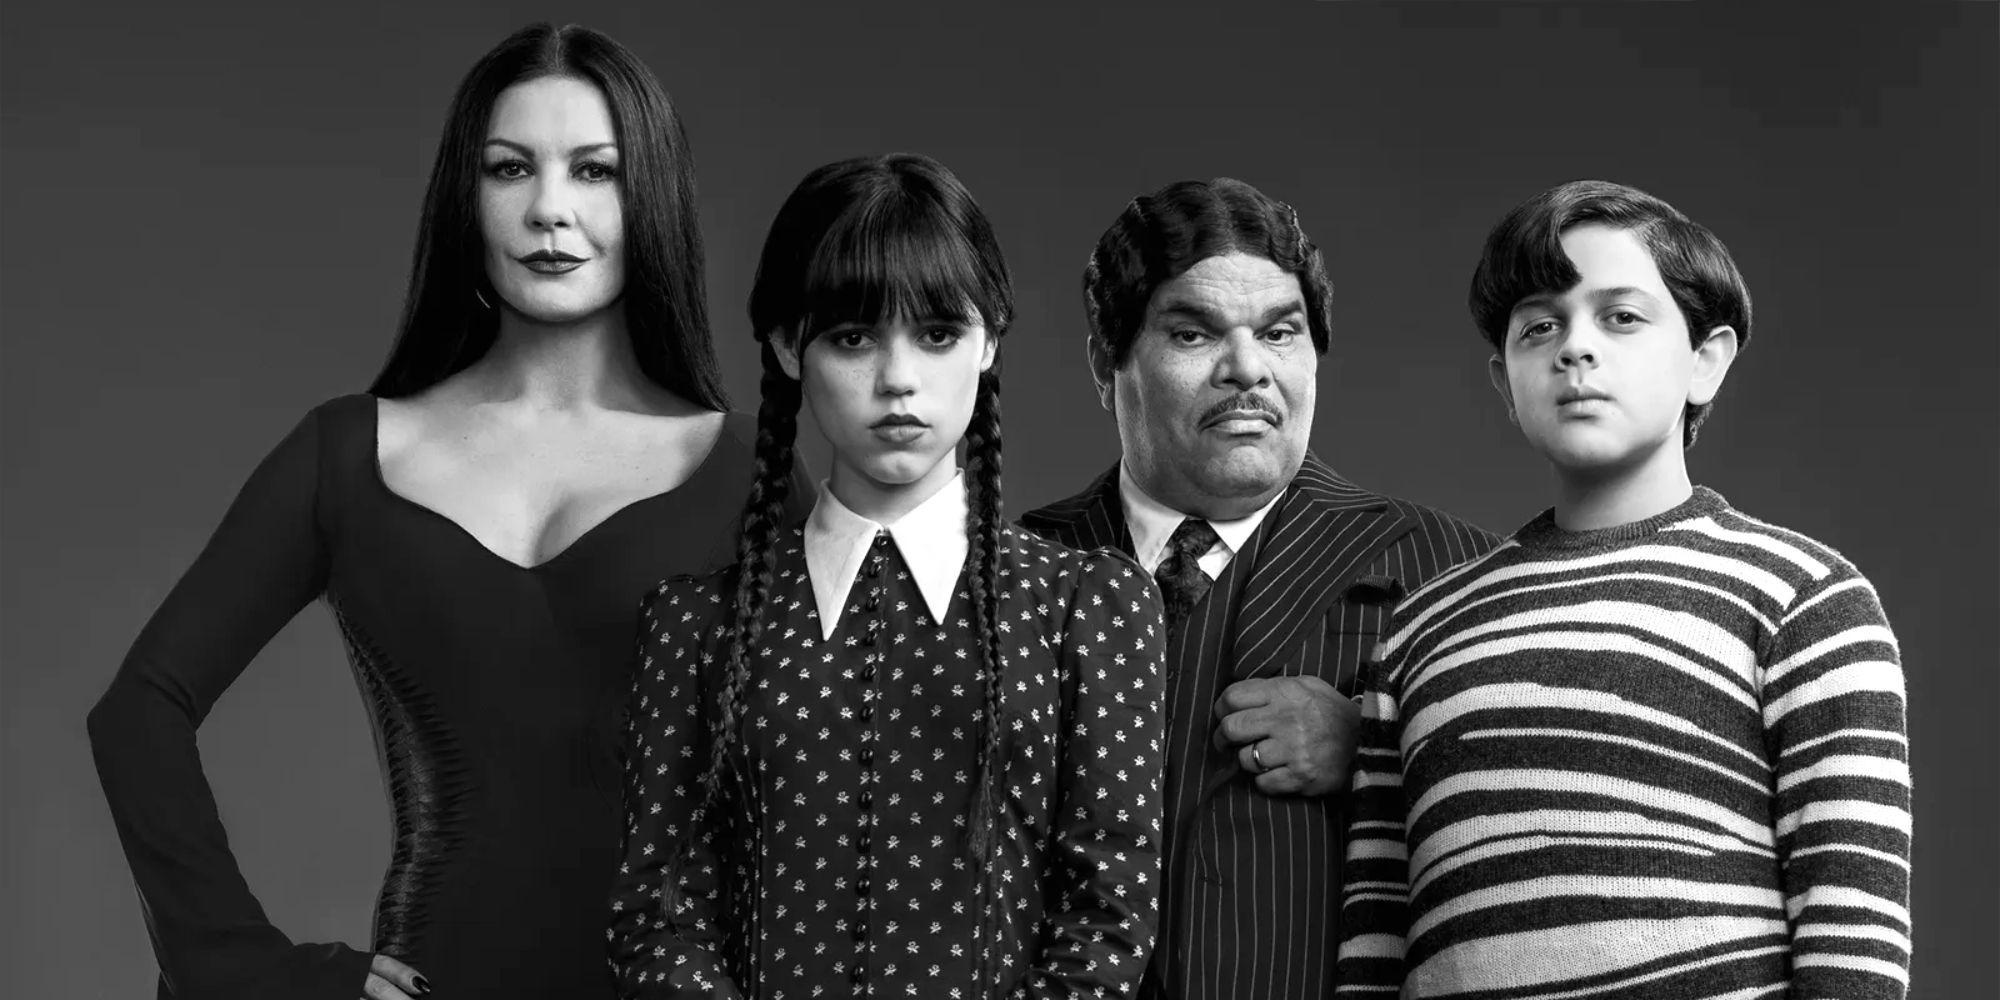 Wednesday Cast - The Addams Family